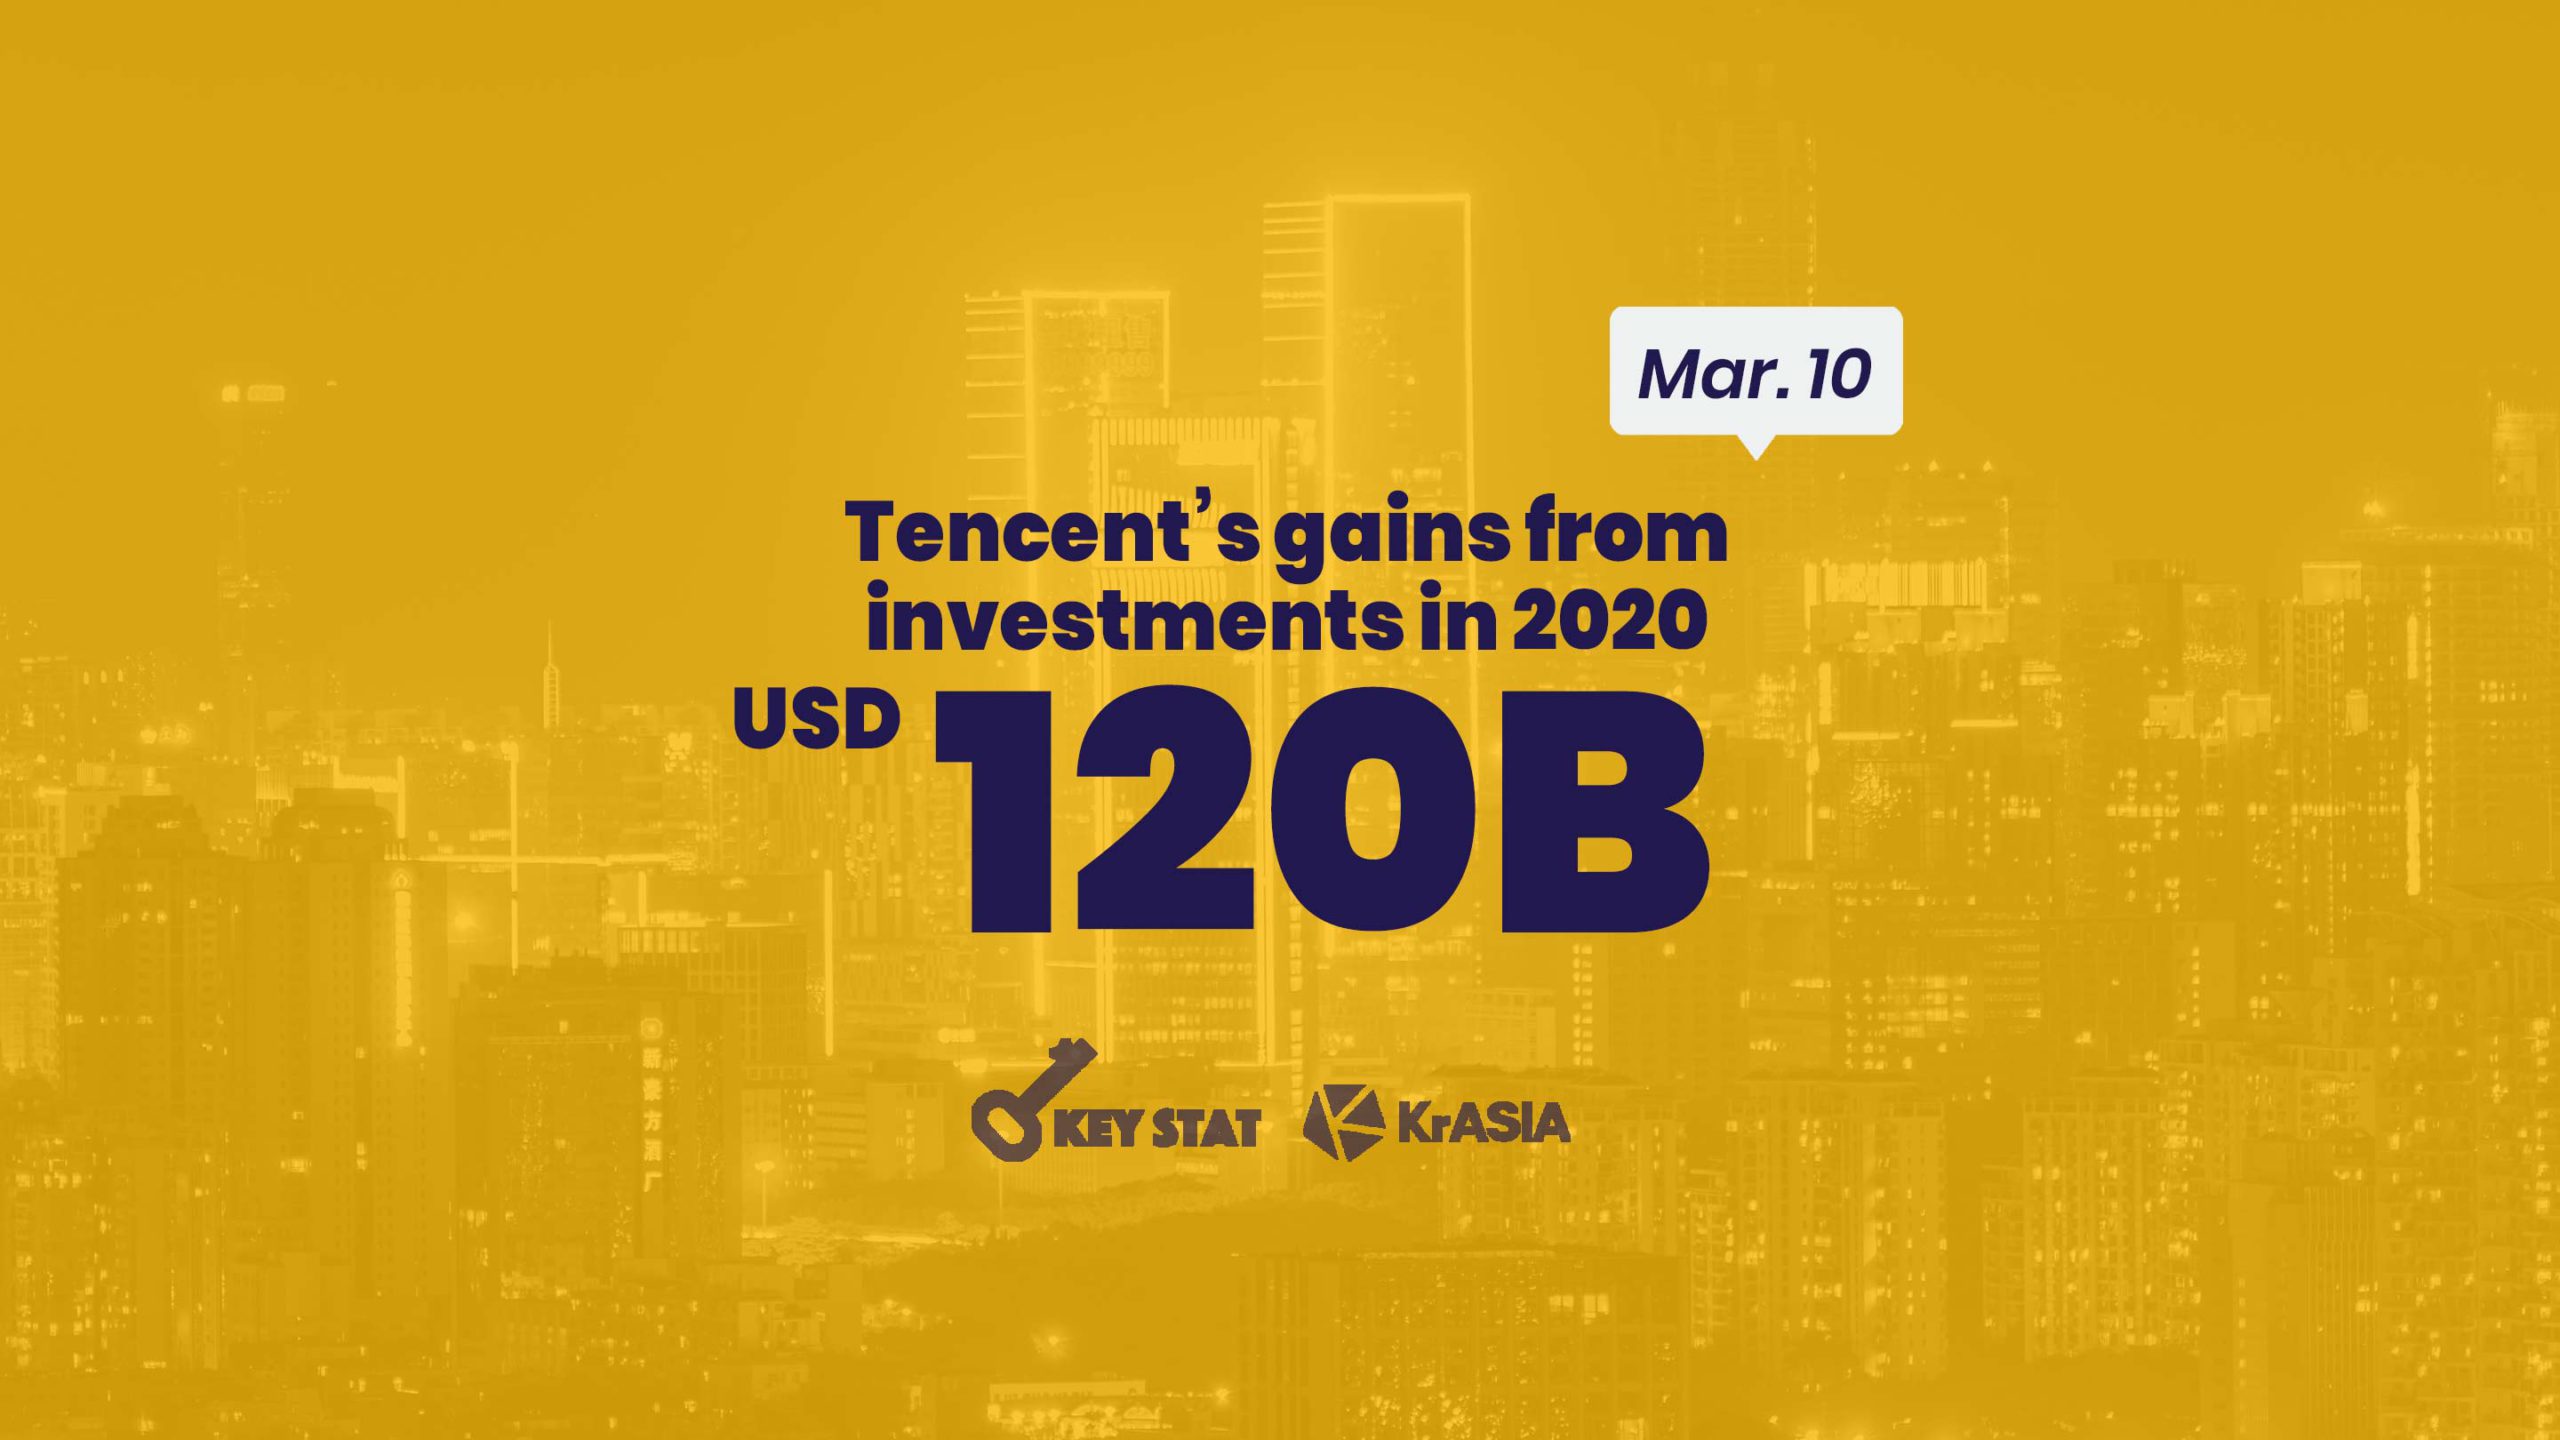 KEY STAT | Tencent makes USD 120 billion from investments in stock rally